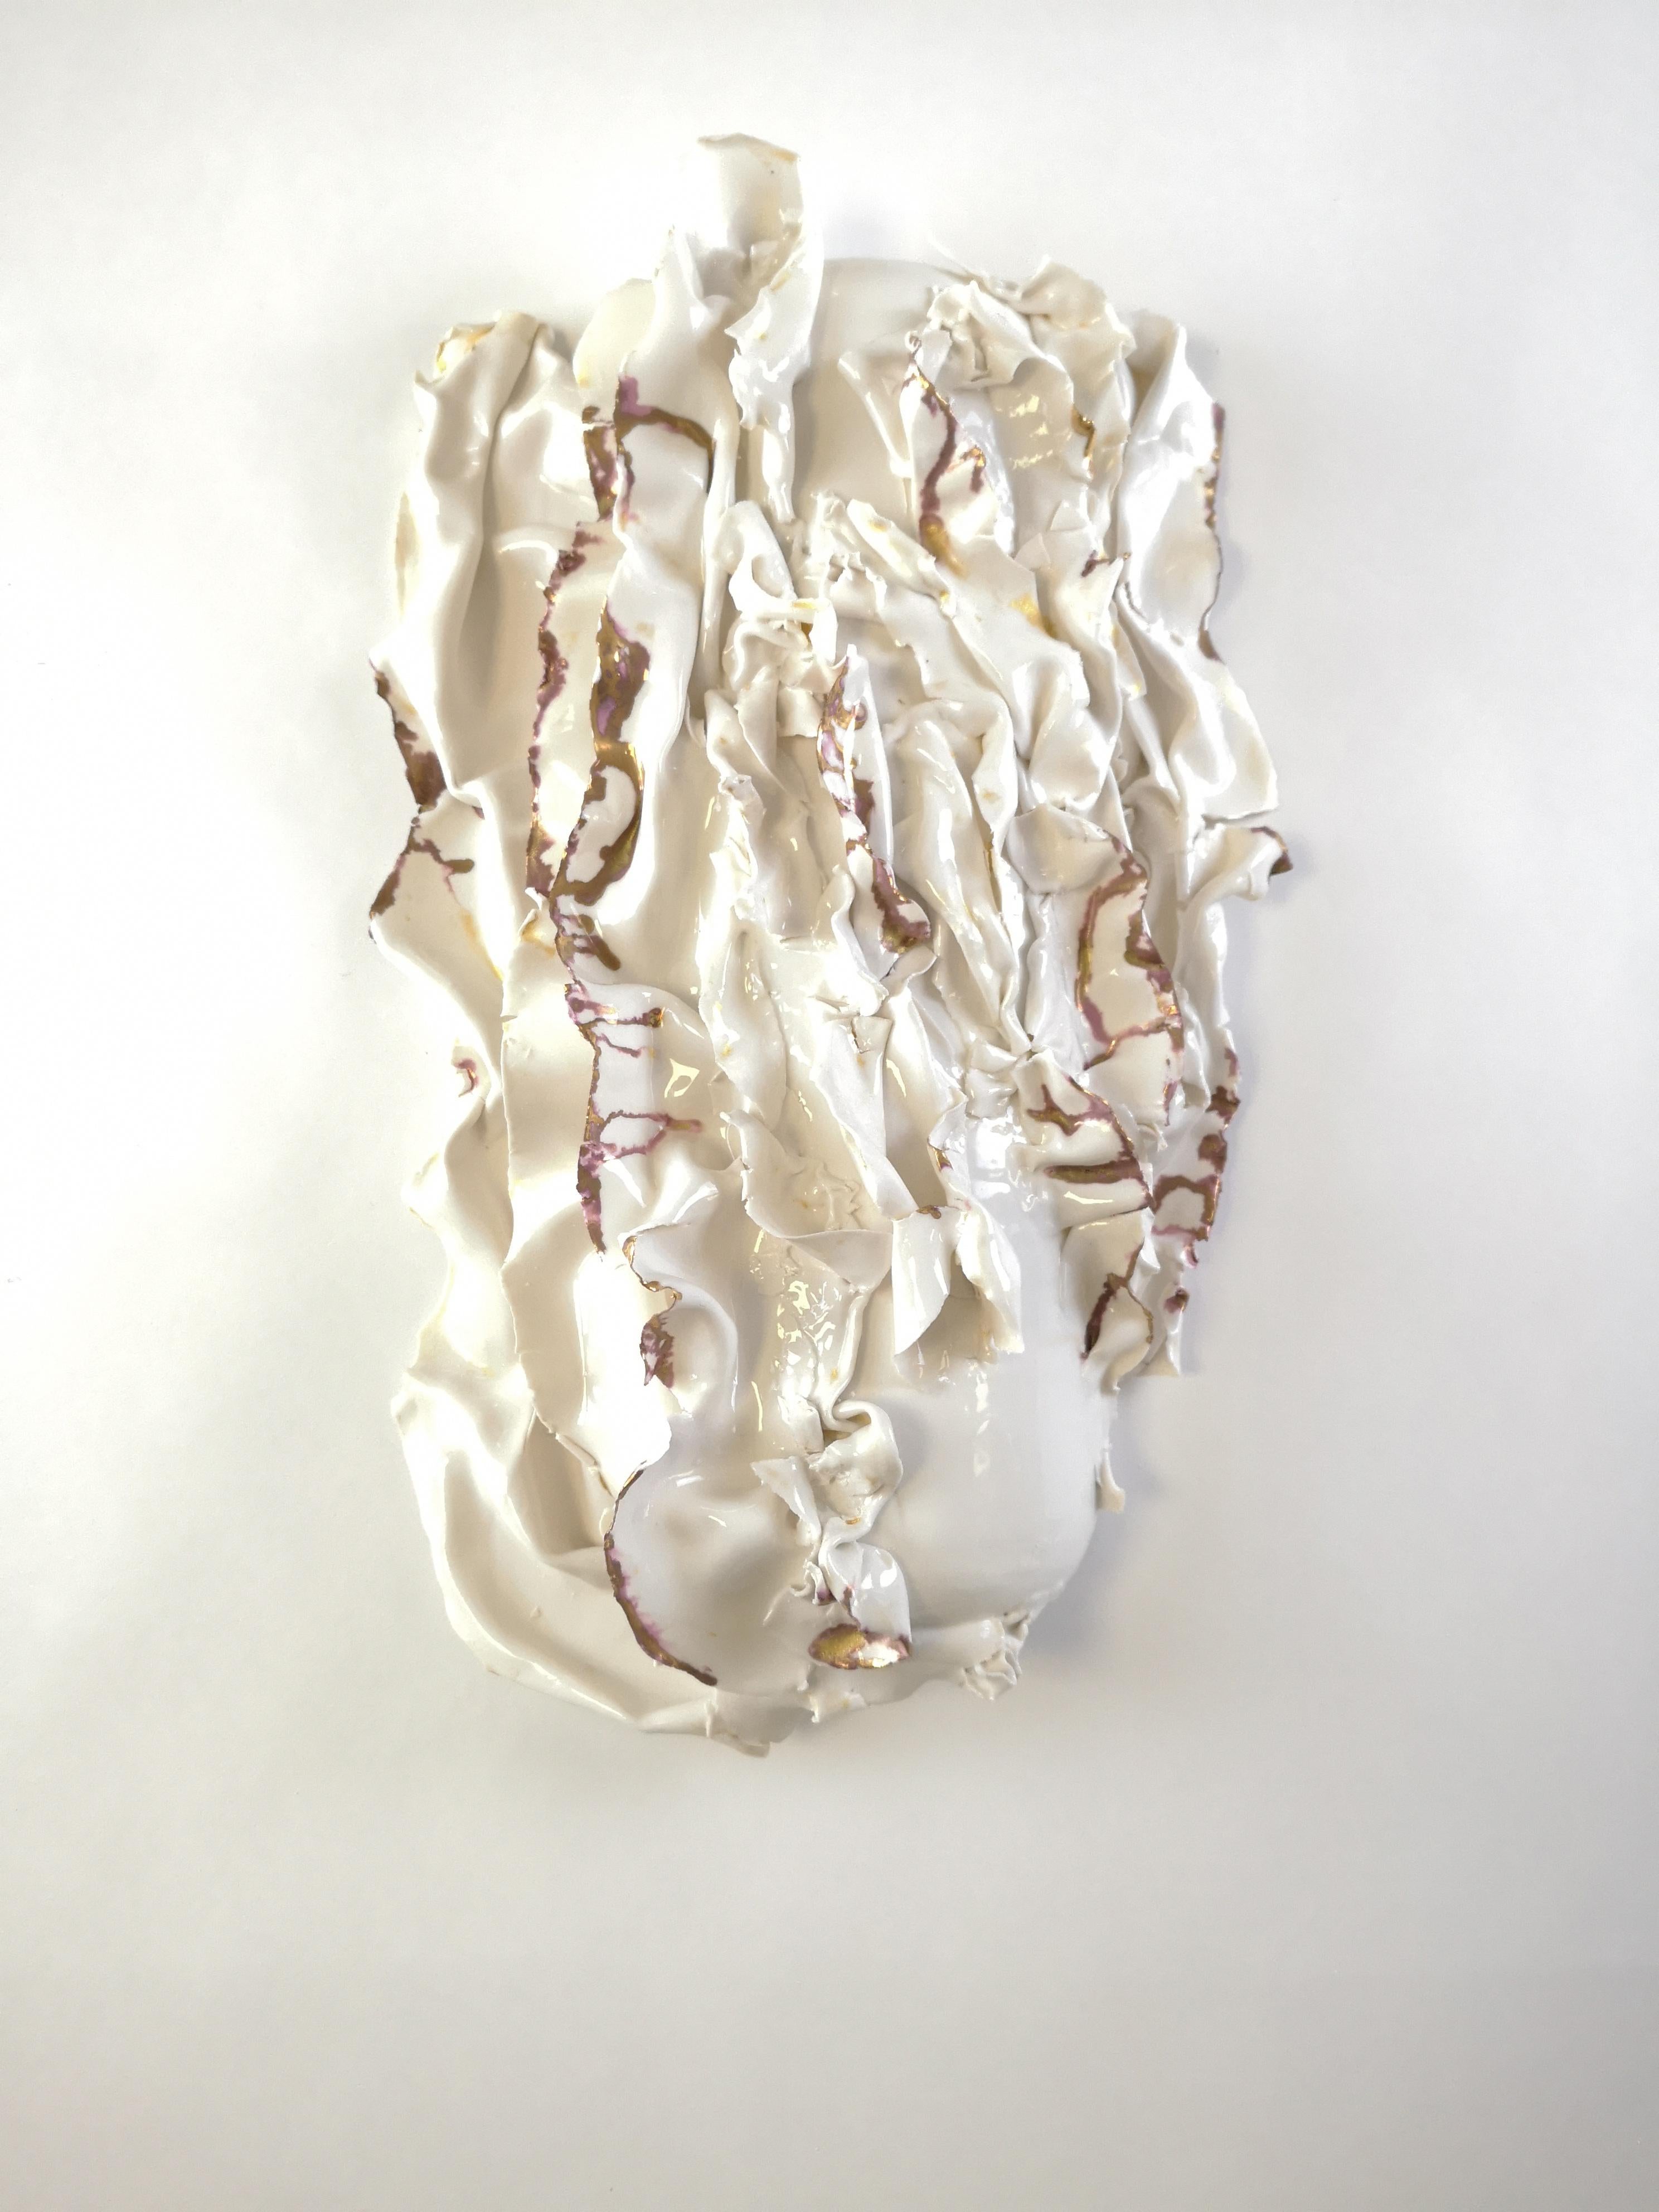 Like In Water Wall Sculpture by Dora Stanczel
One of a Kind.
Dimensions: D 10 x W 26 x H 43 cm.
Materials: Porcelain, metal and gold.

I create bespoke and luxurious porcelain pieces with a careful aesthetic. Beyond the technical mastery of casting,